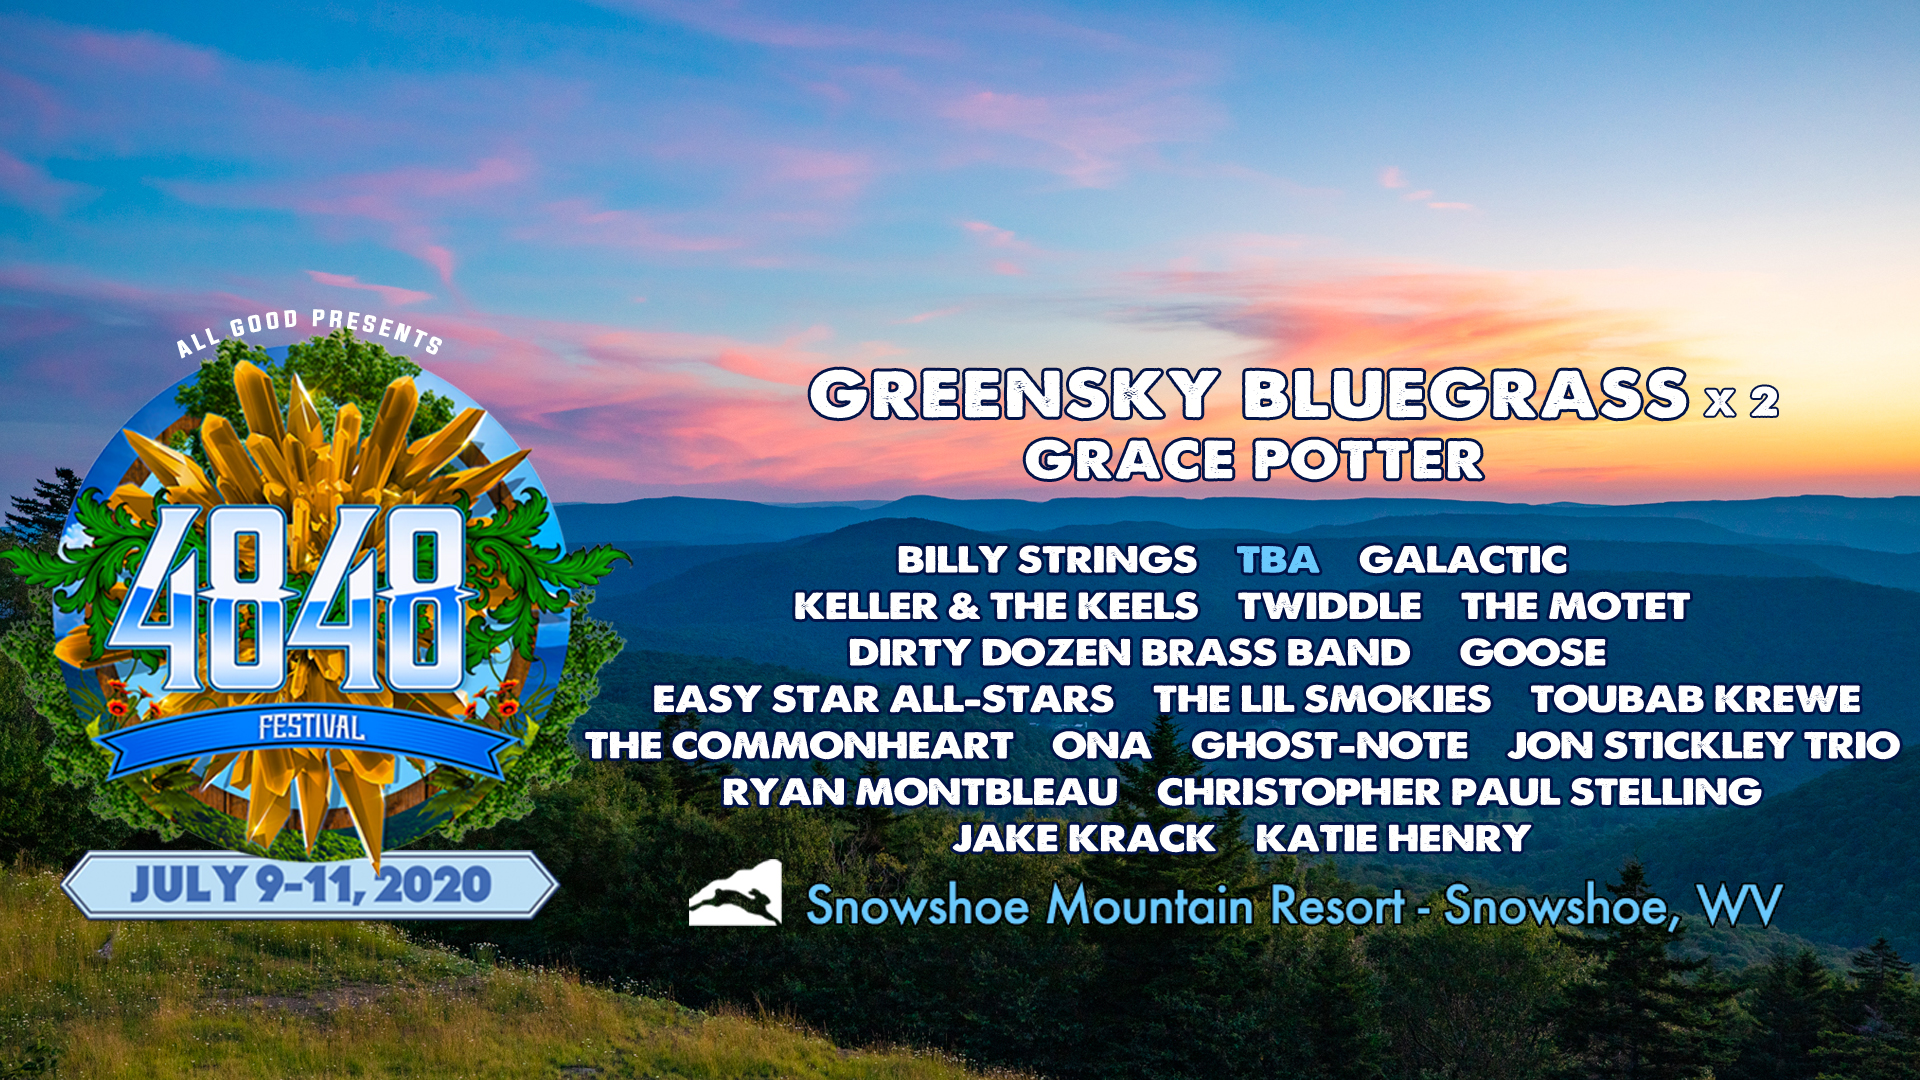 2nd Annual 4848 Festival: Greensky Bluegrass, Grace Potter, Billy Strings, Goose and More